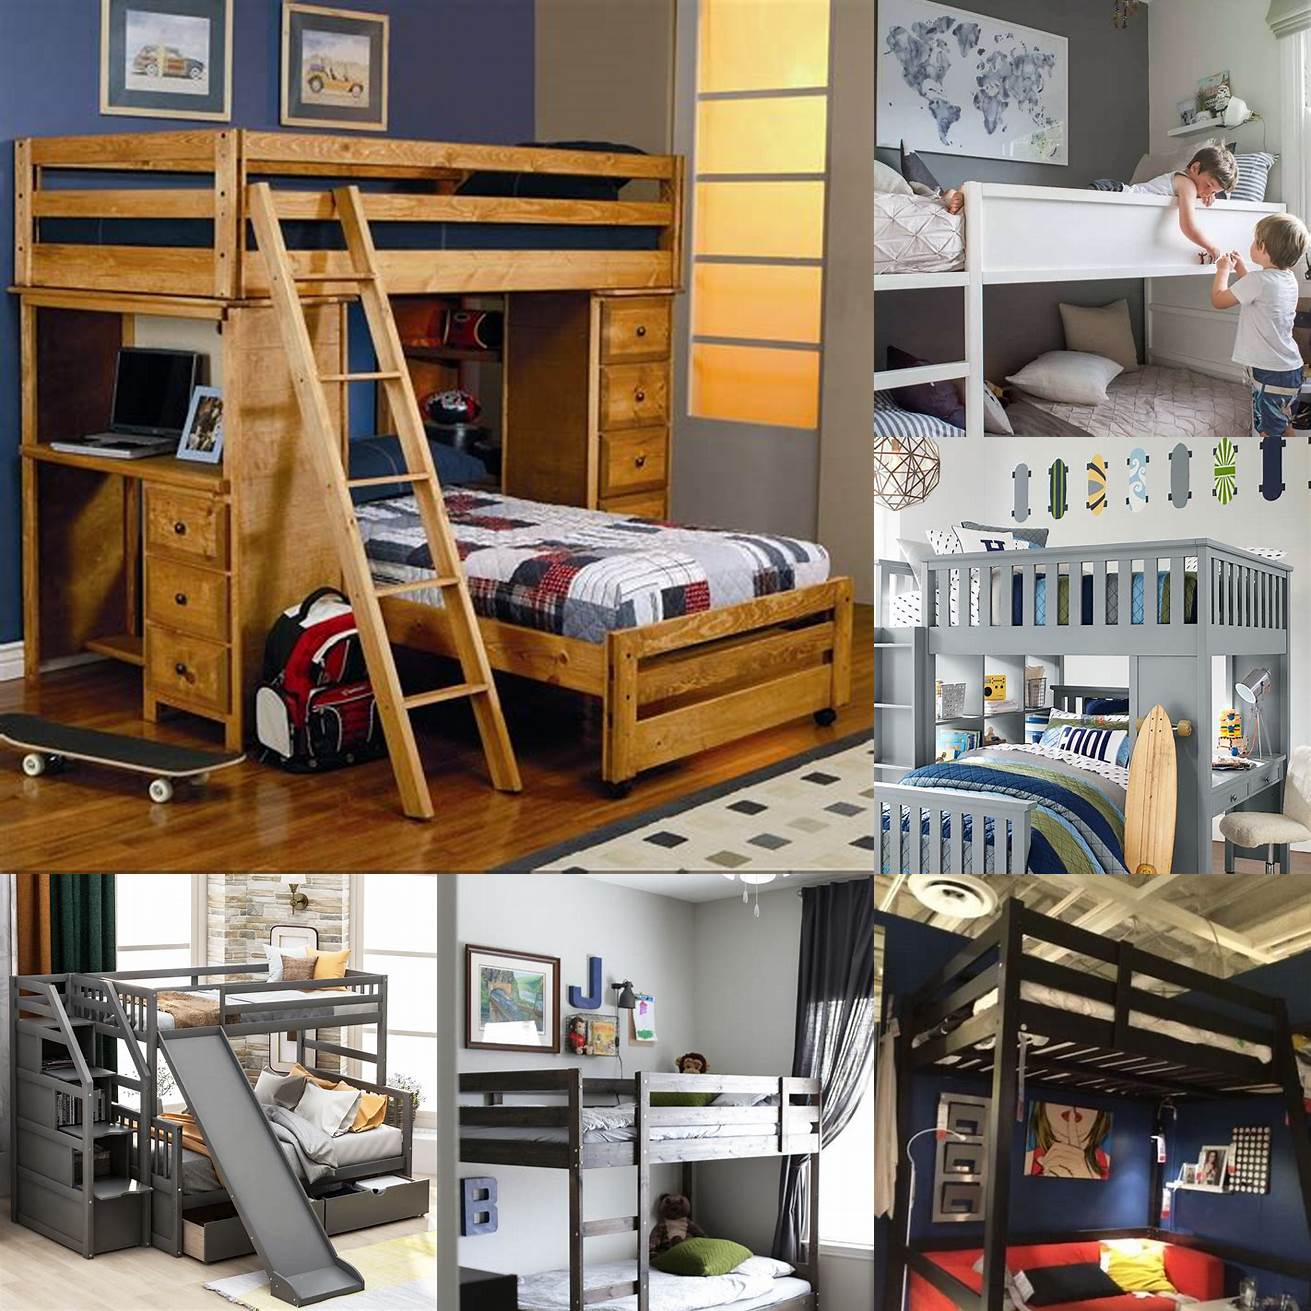 Flexibility Boys bunk beds come in various styles and sizes making them flexible for any room